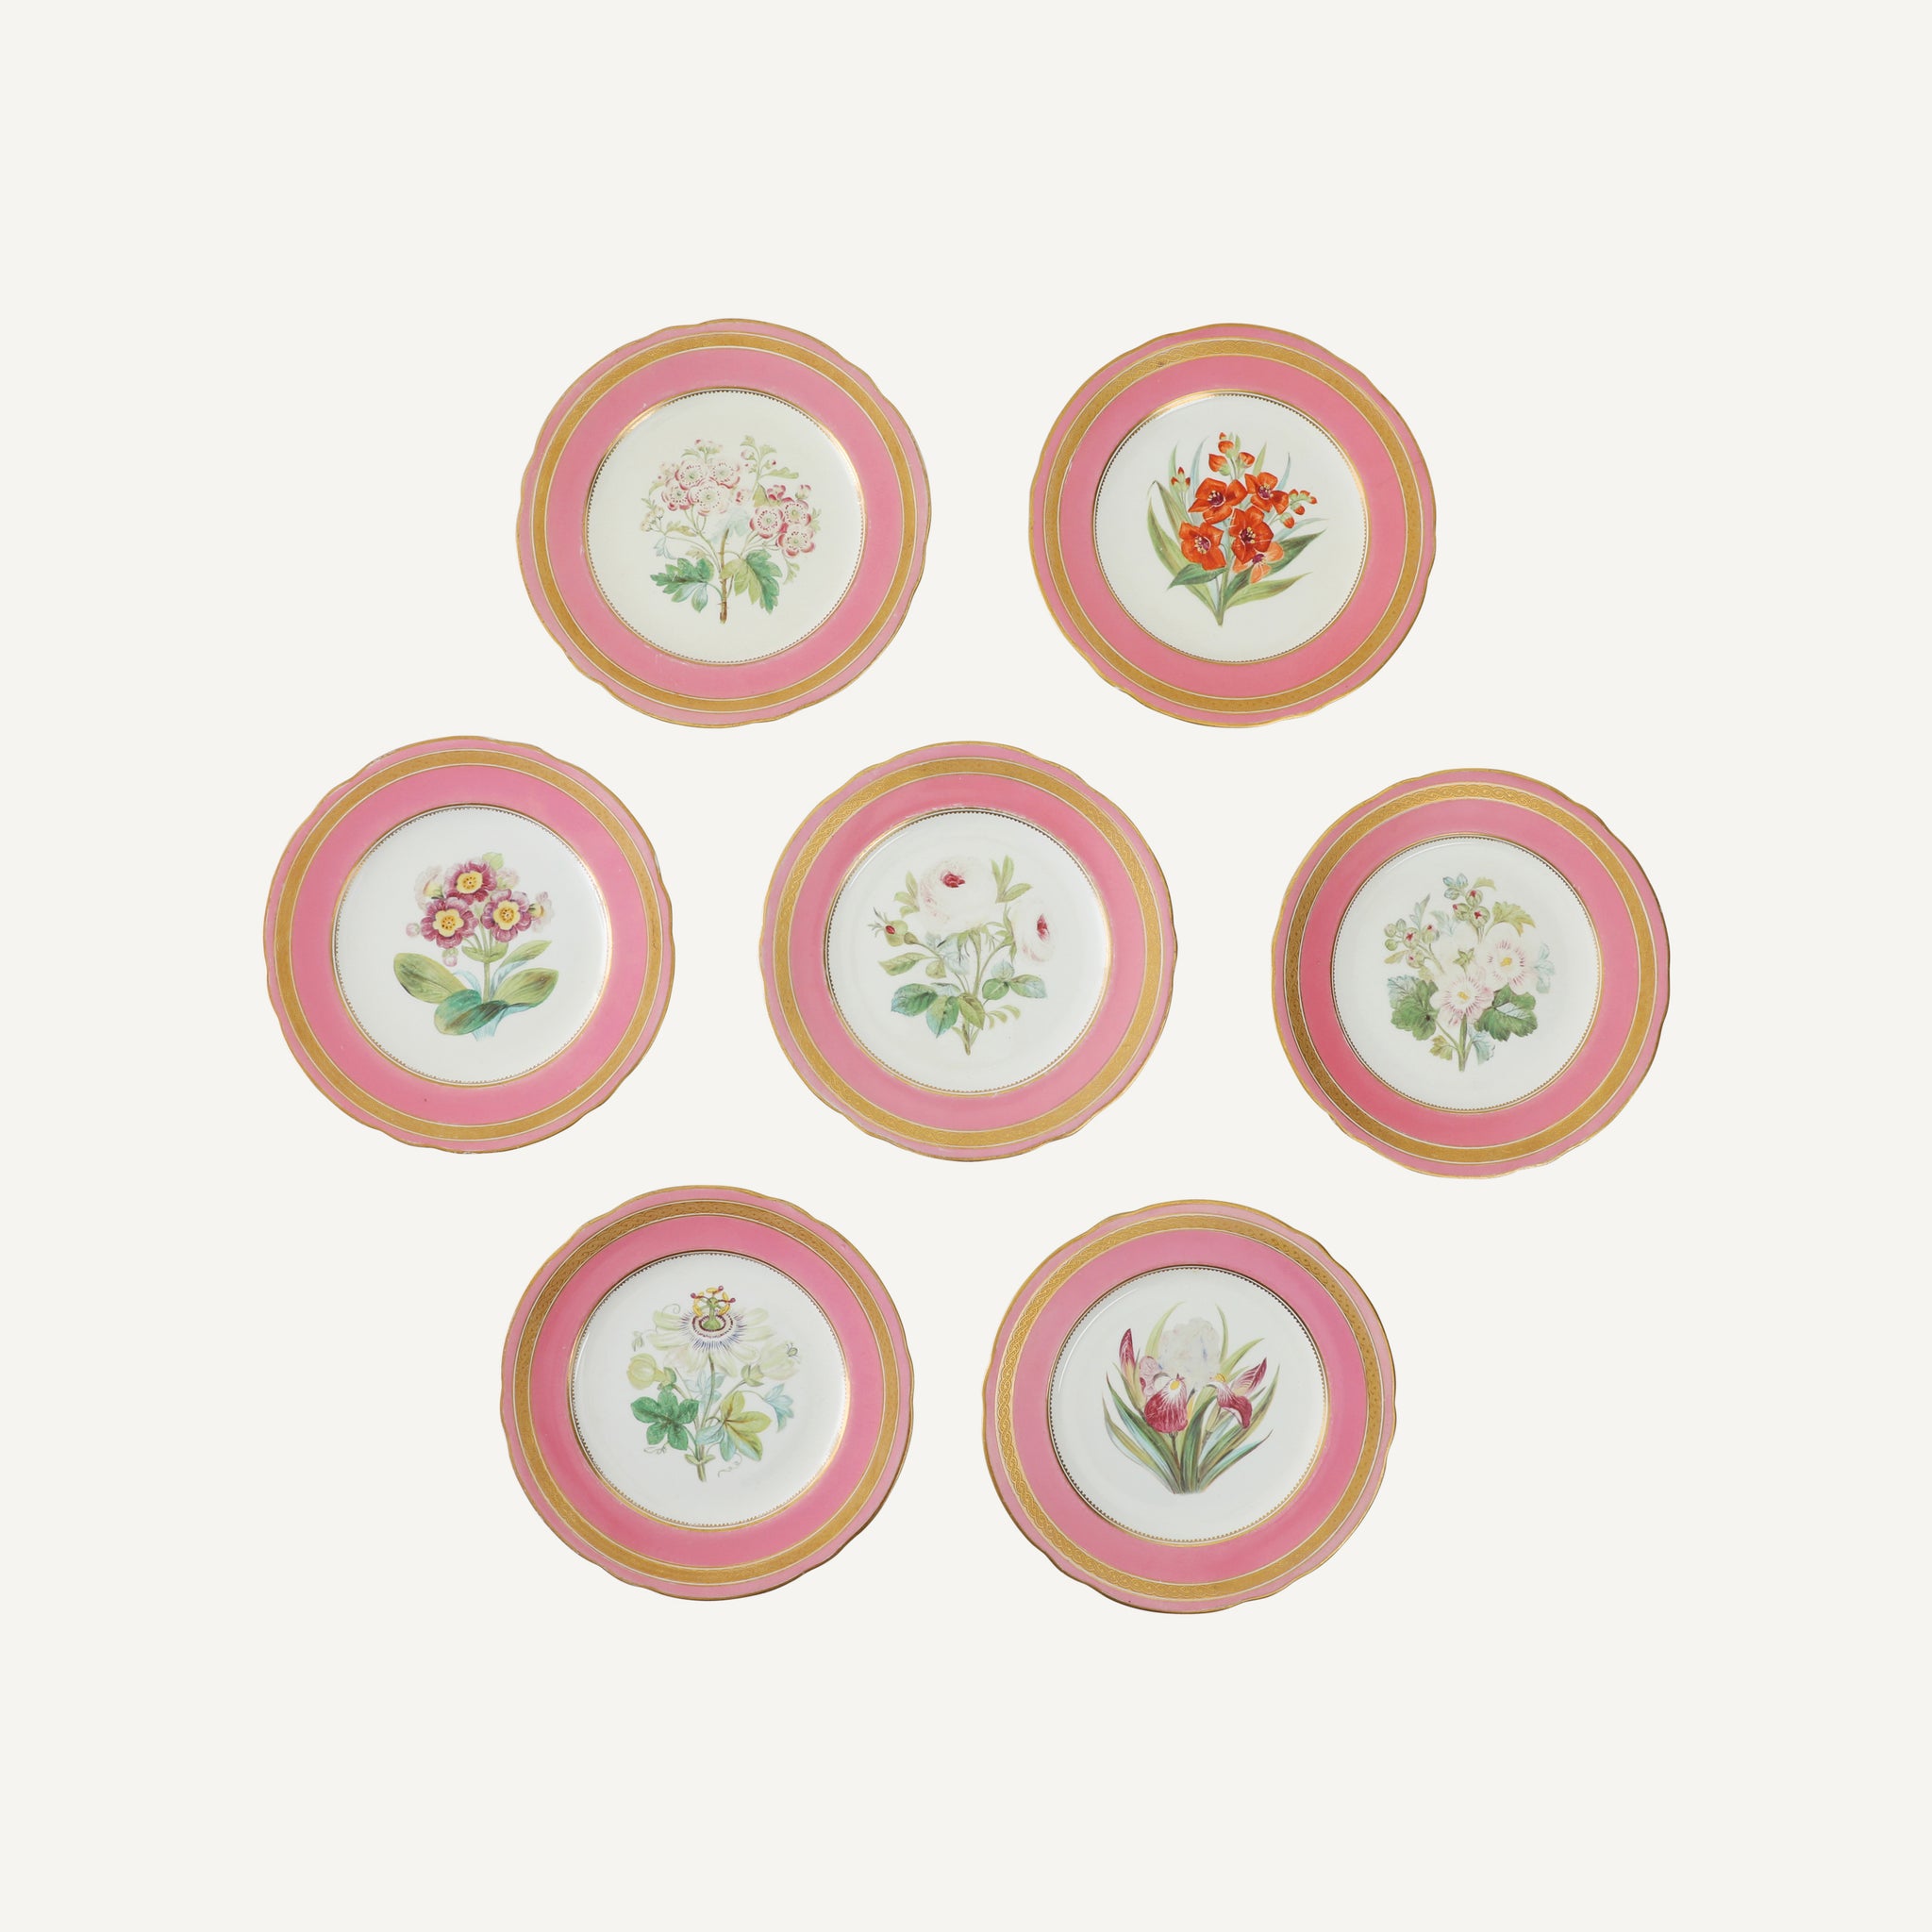 ANTIQUE ENGLISH HAND PAINTED PLATES